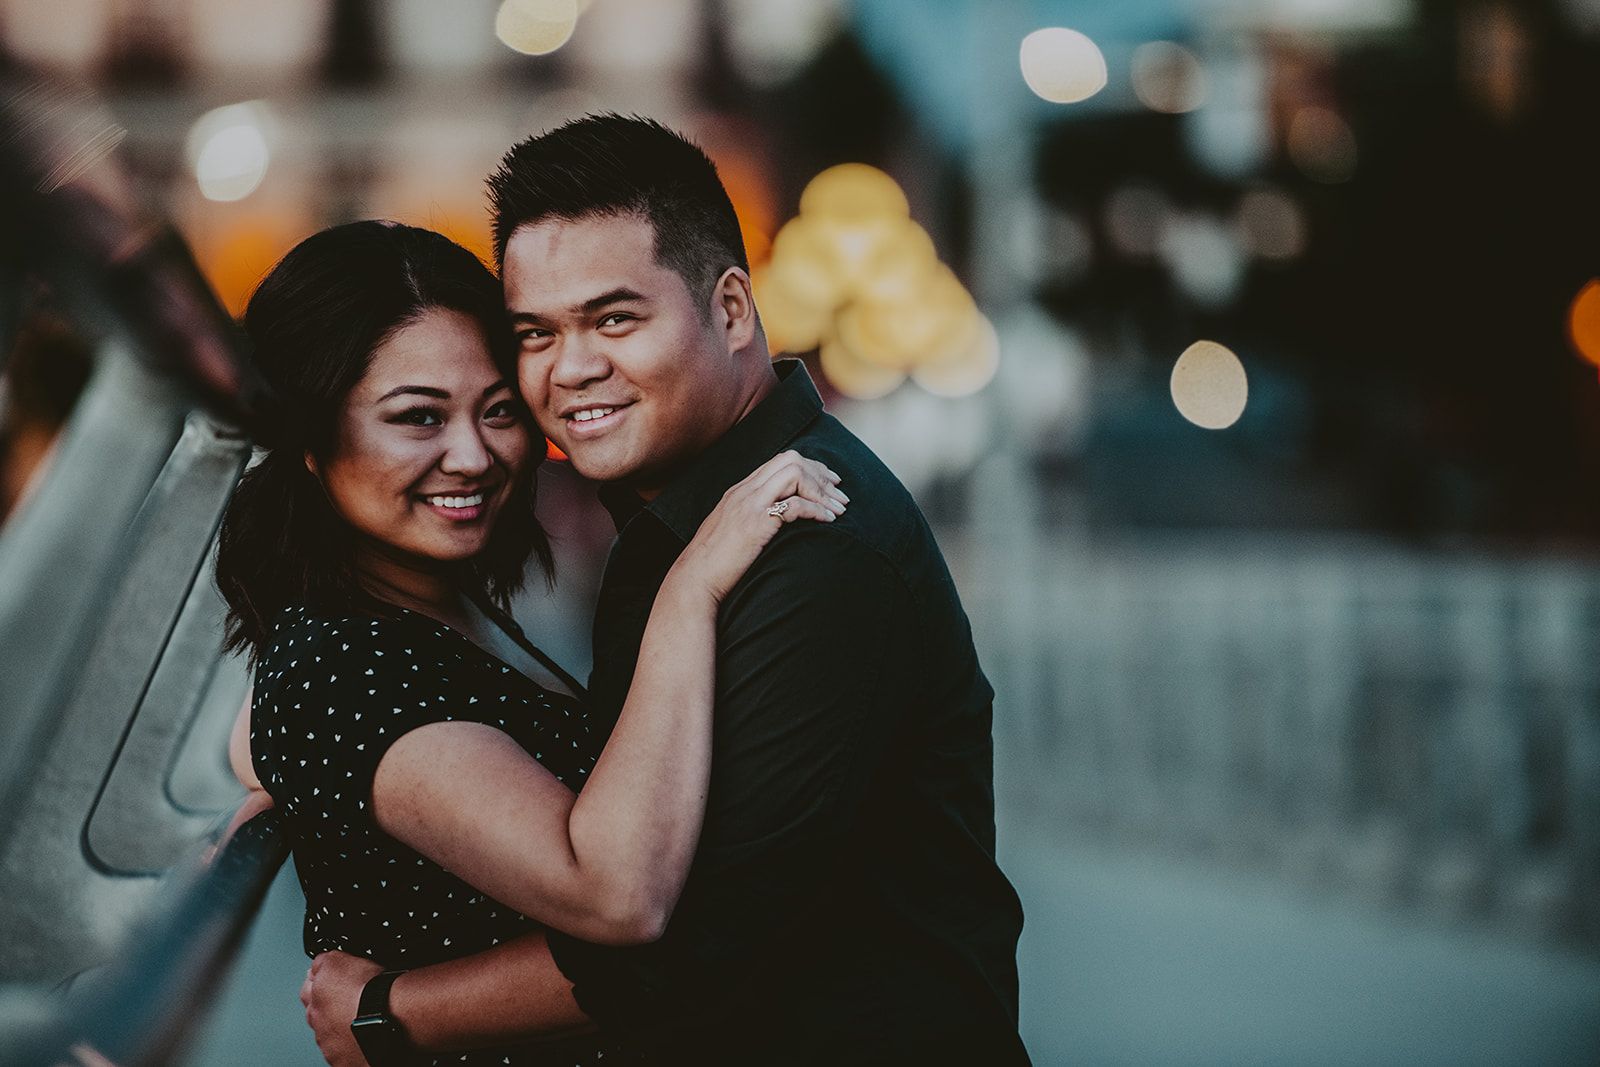 engagement photoshoot by Kelsey Goodwin of KGOODPHOTO